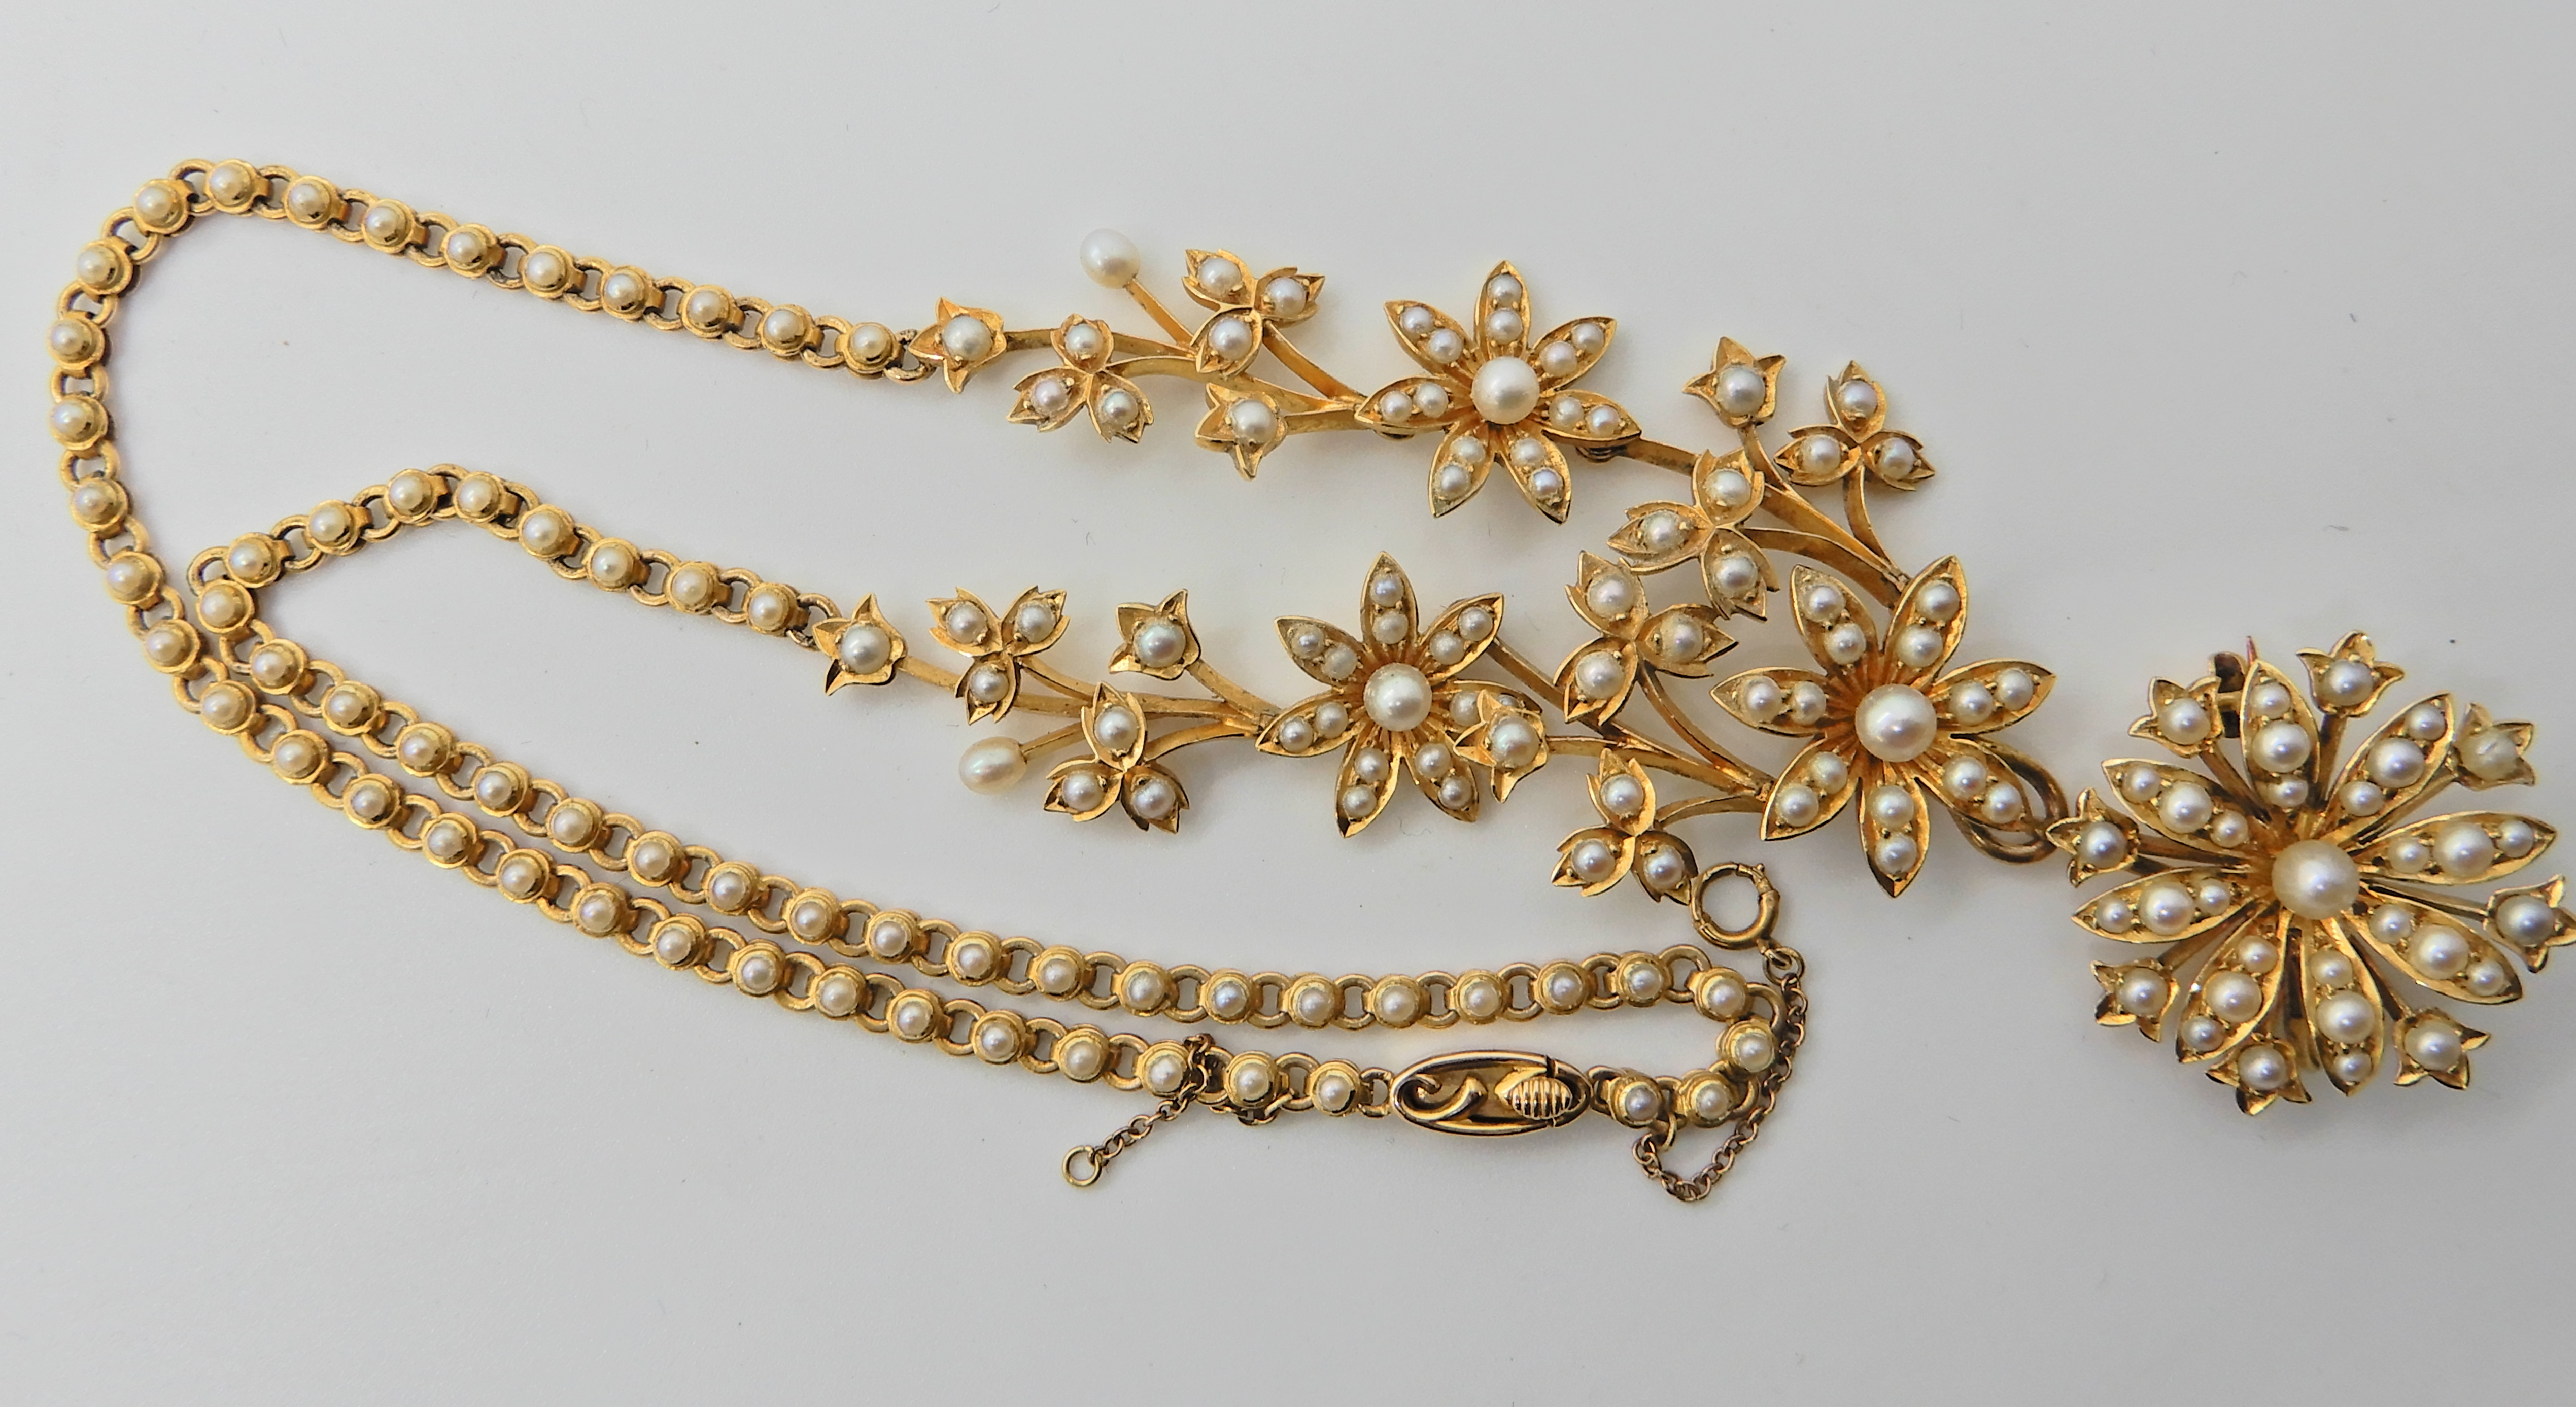 A 15ct gold floral pearl set necklace with detachable brooch, the chain is also set along its length - Image 4 of 4